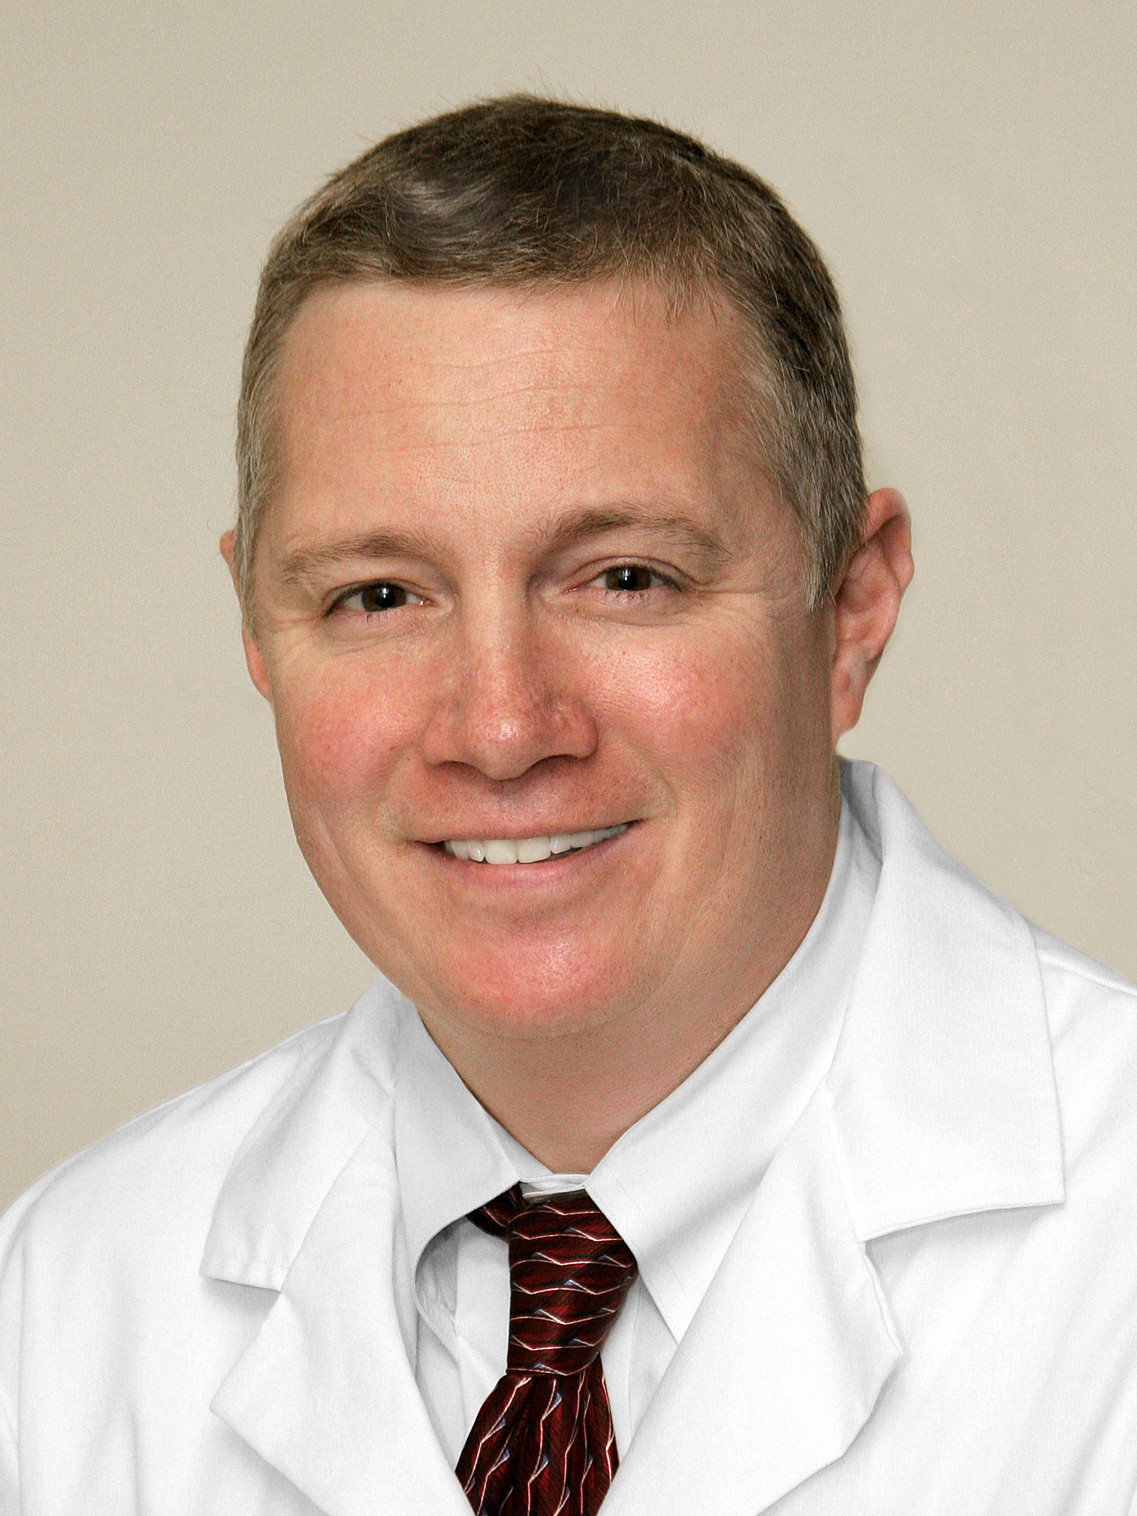 William Small Jr., MD, named chair of Gynecological Cancer Intergroup - Chicago Tribune - chi-ugc-article-william-small-jr-md-named-chair-of-gynecol-2014-11-07